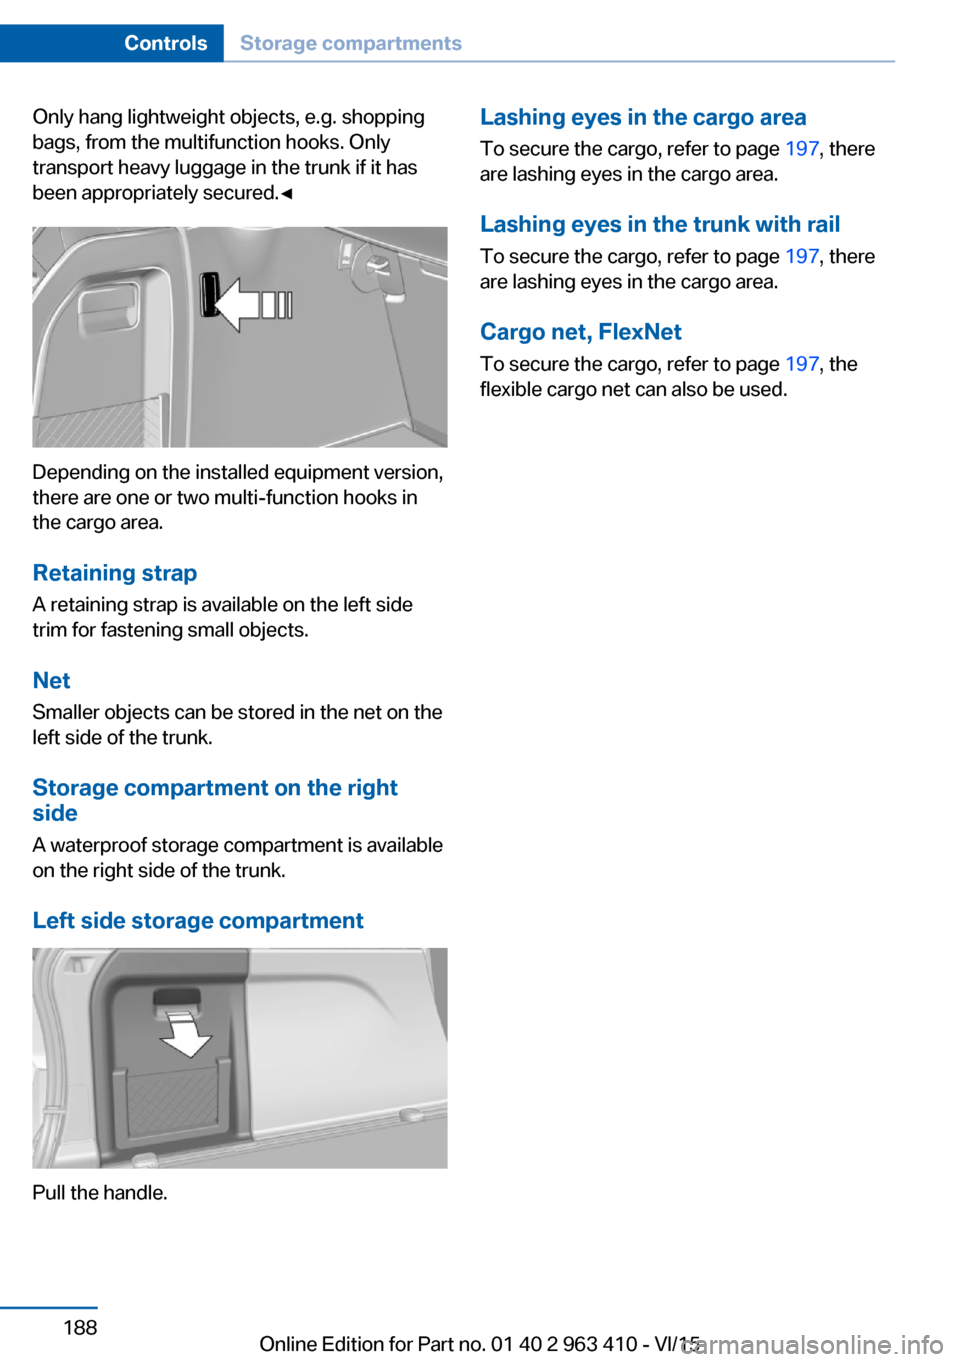 BMW X5 2015 F15 Repair Manual Only hang lightweight objects, e.g. shopping
bags, from the multifunction hooks. Only
transport heavy luggage in the trunk if it has
been appropriately secured.◀
Depending on the installed equipment